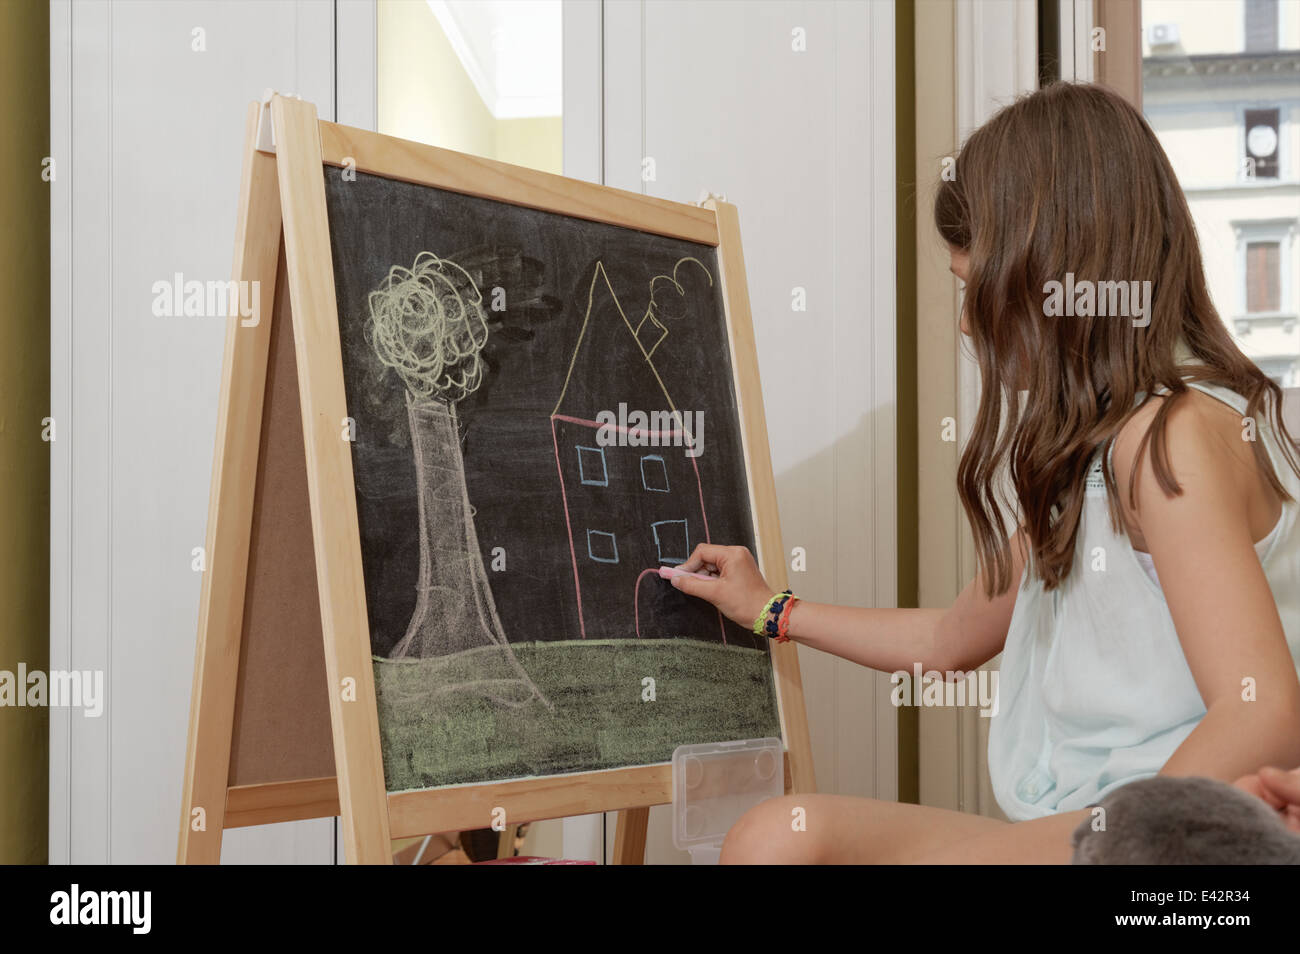 Girl drawing on blackboard Banque D'Images